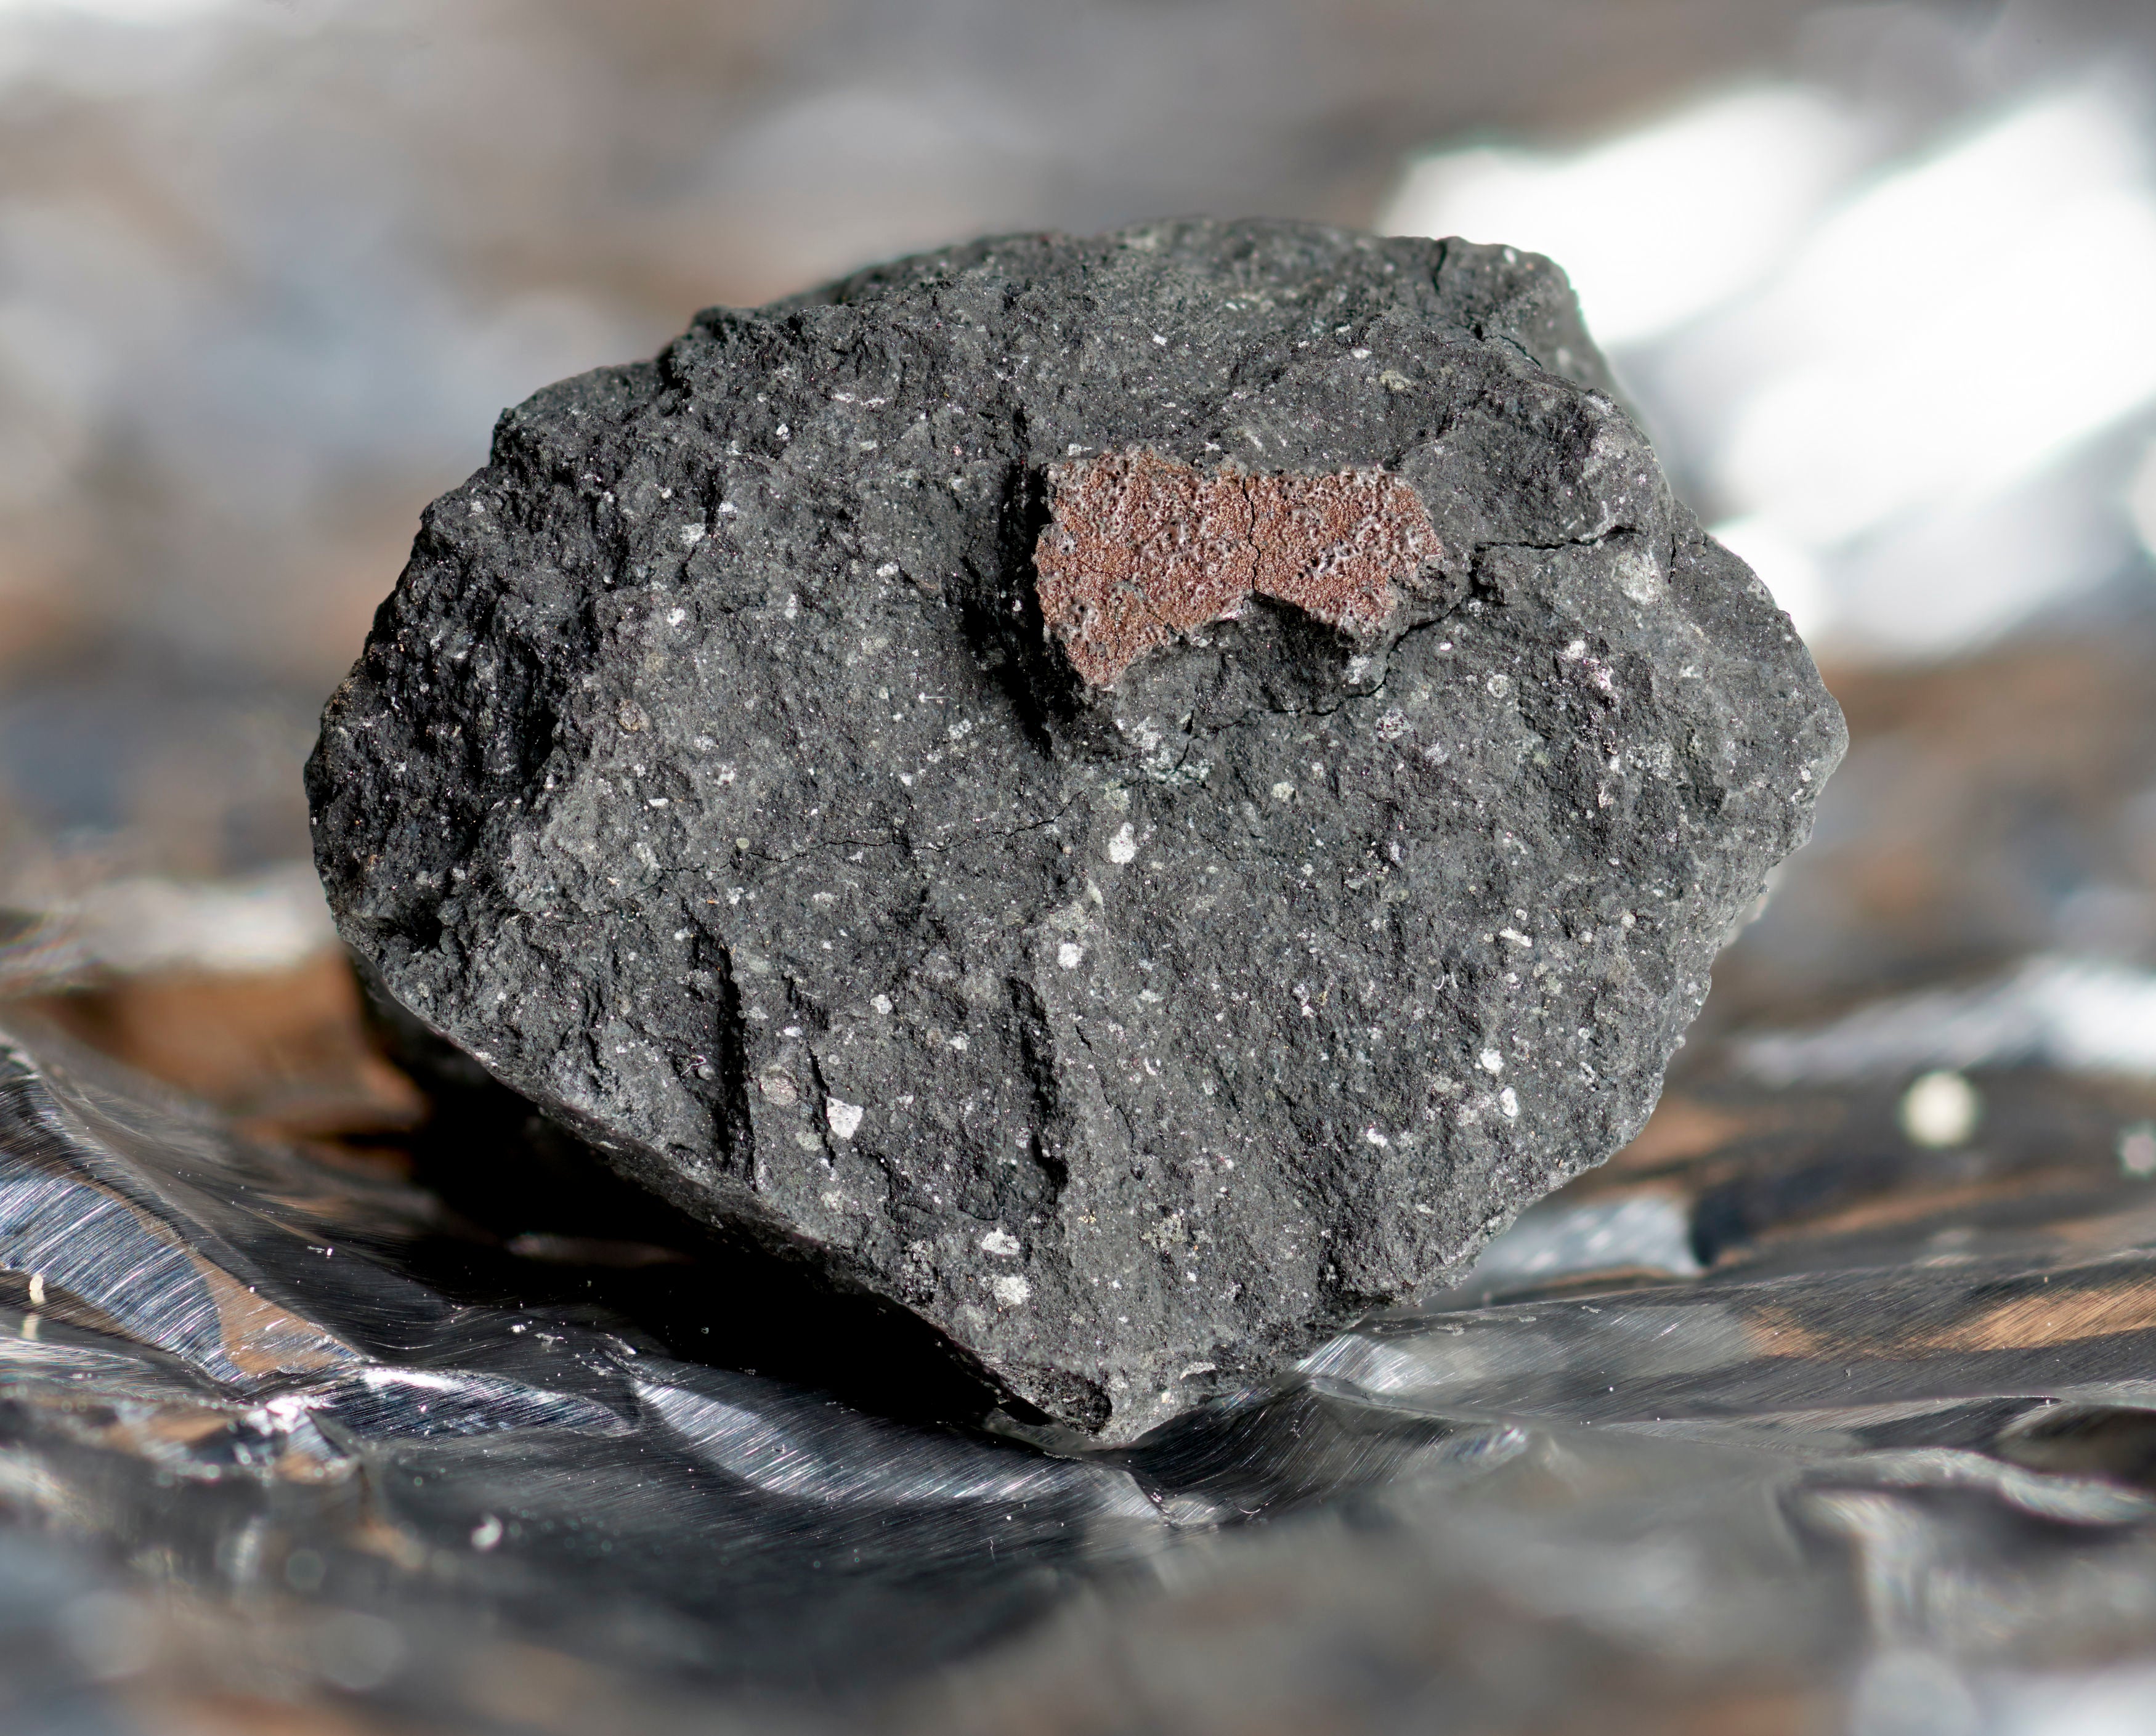 Even meteorites are now available for sale on the internet